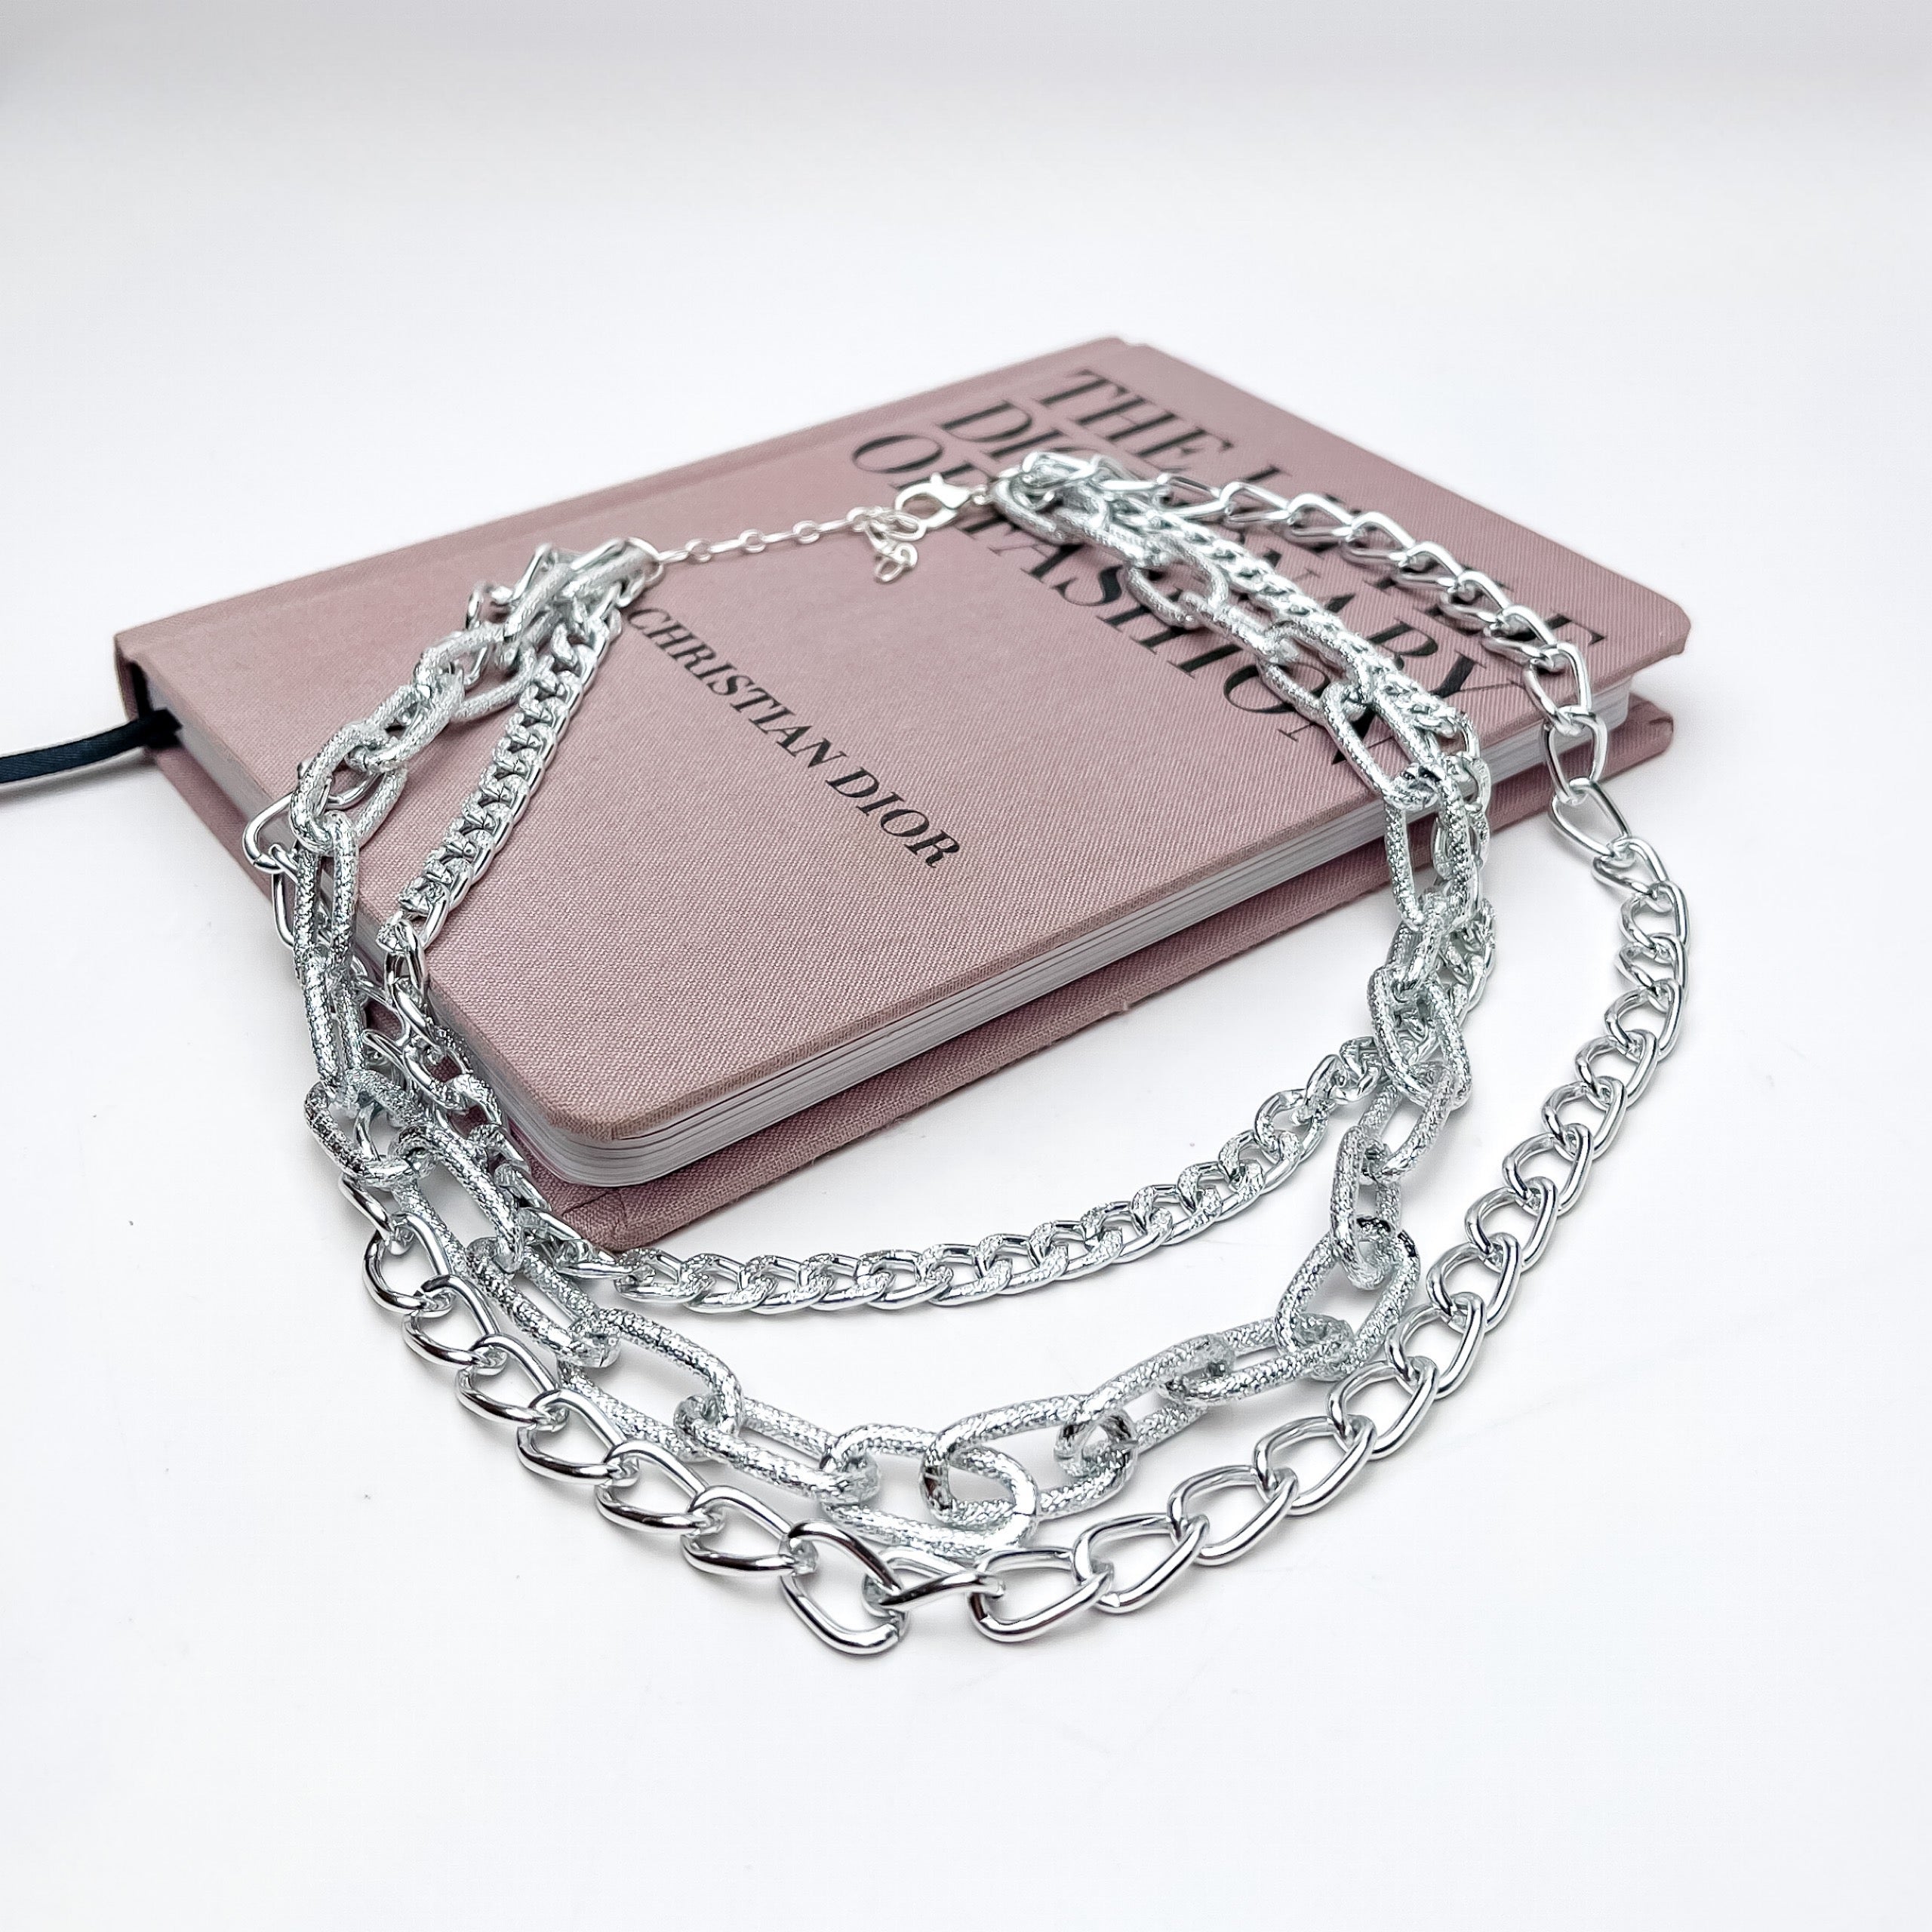 Triple Strand Chunky Chain Silver Tone Necklace. This necklace is putured laying on a pink book with a white background.